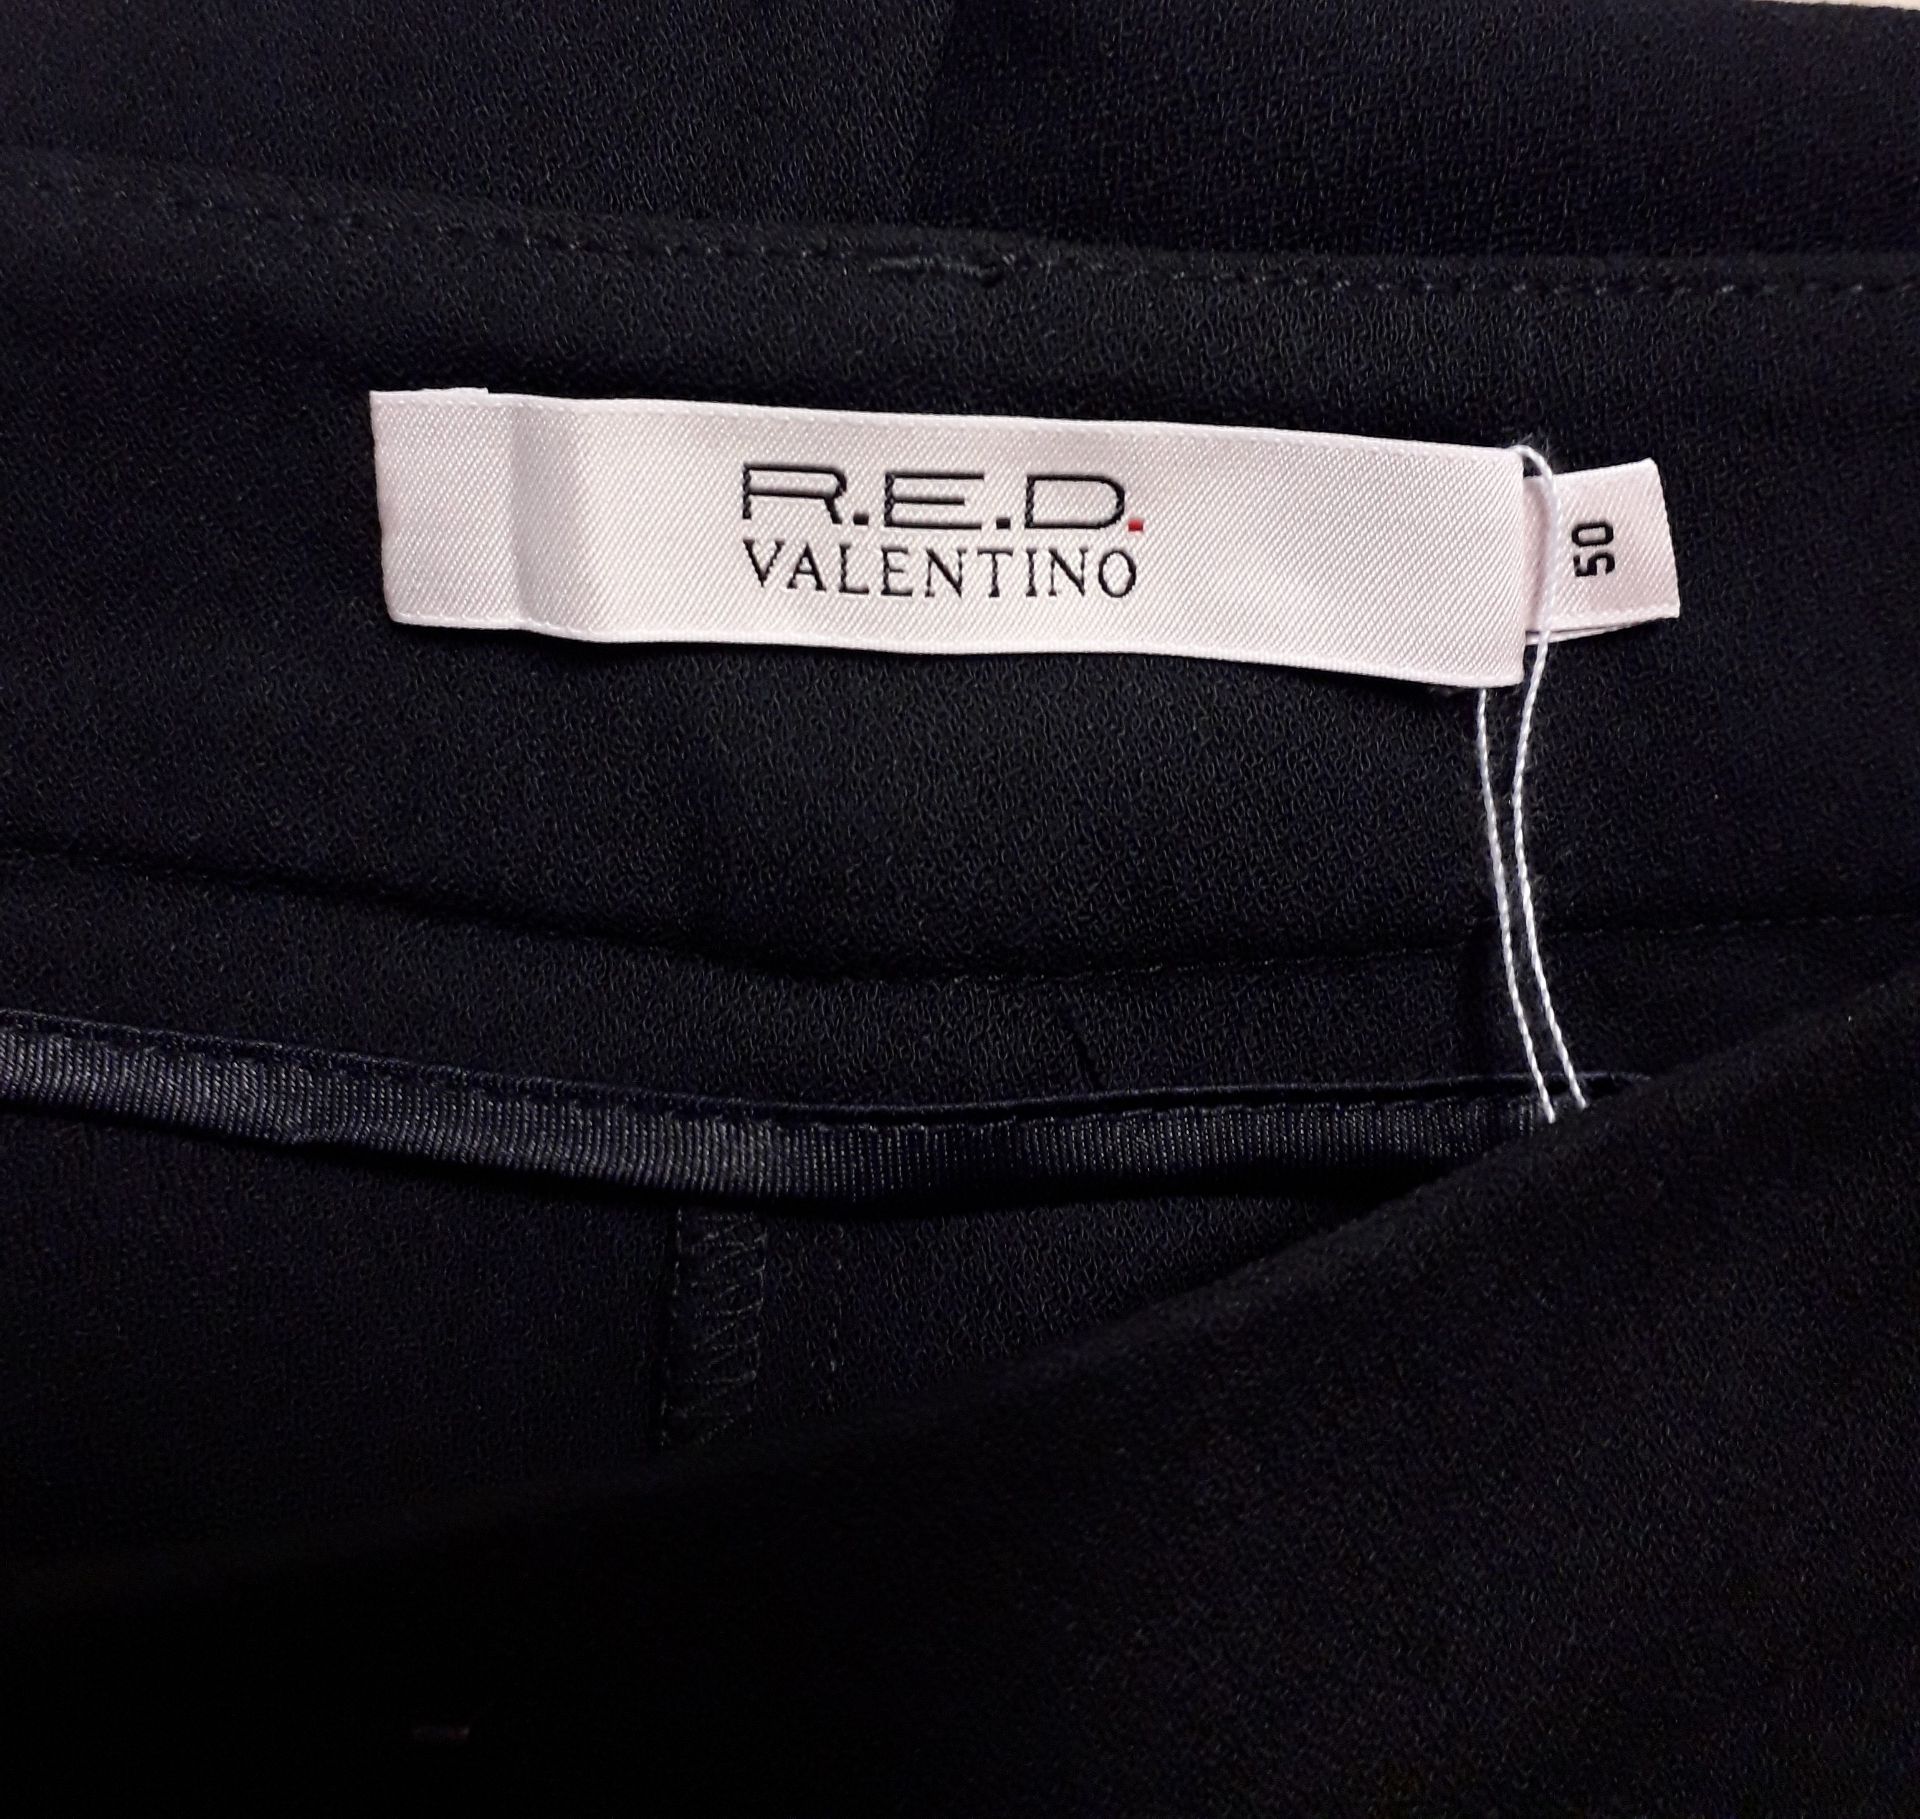 1 x Valentino R.E.D Navy Trousers - Size: 20 - Material: 58% Viscose, 40% Wool, 2% Elastane - From a - Image 4 of 4